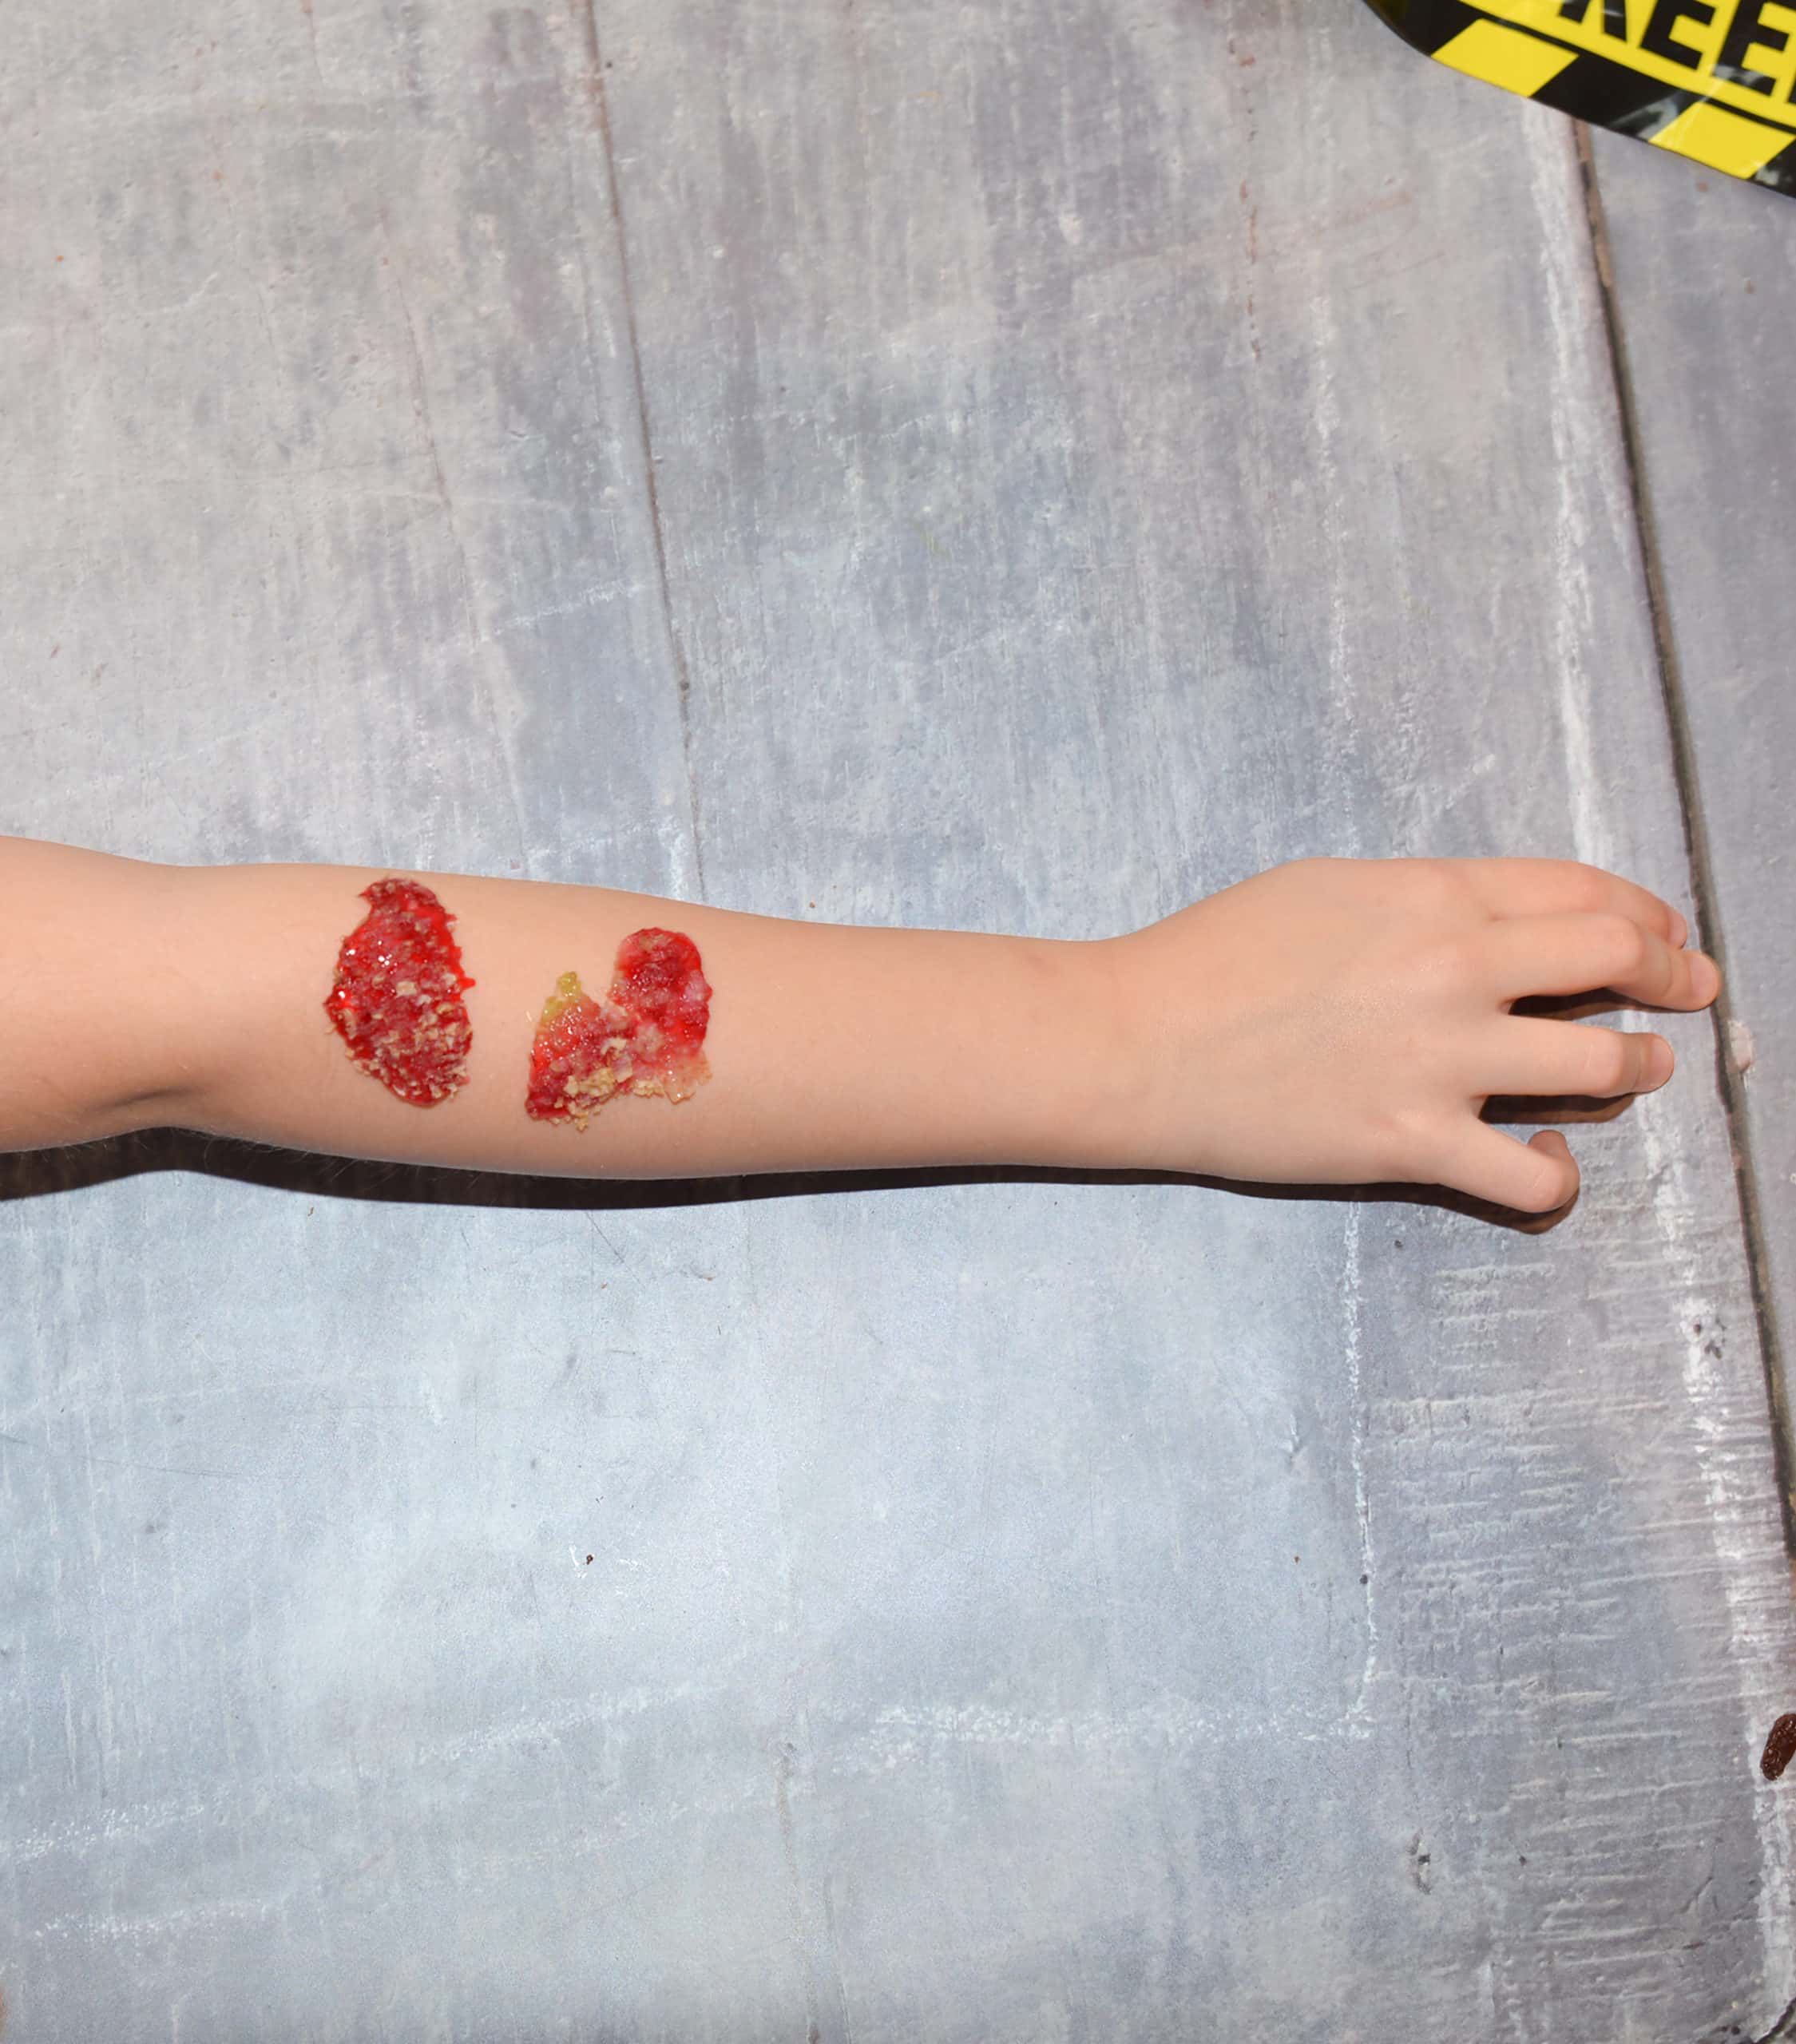 What if I accidentally caused my tattoo scab to peel off while it's still  healing? - Quora